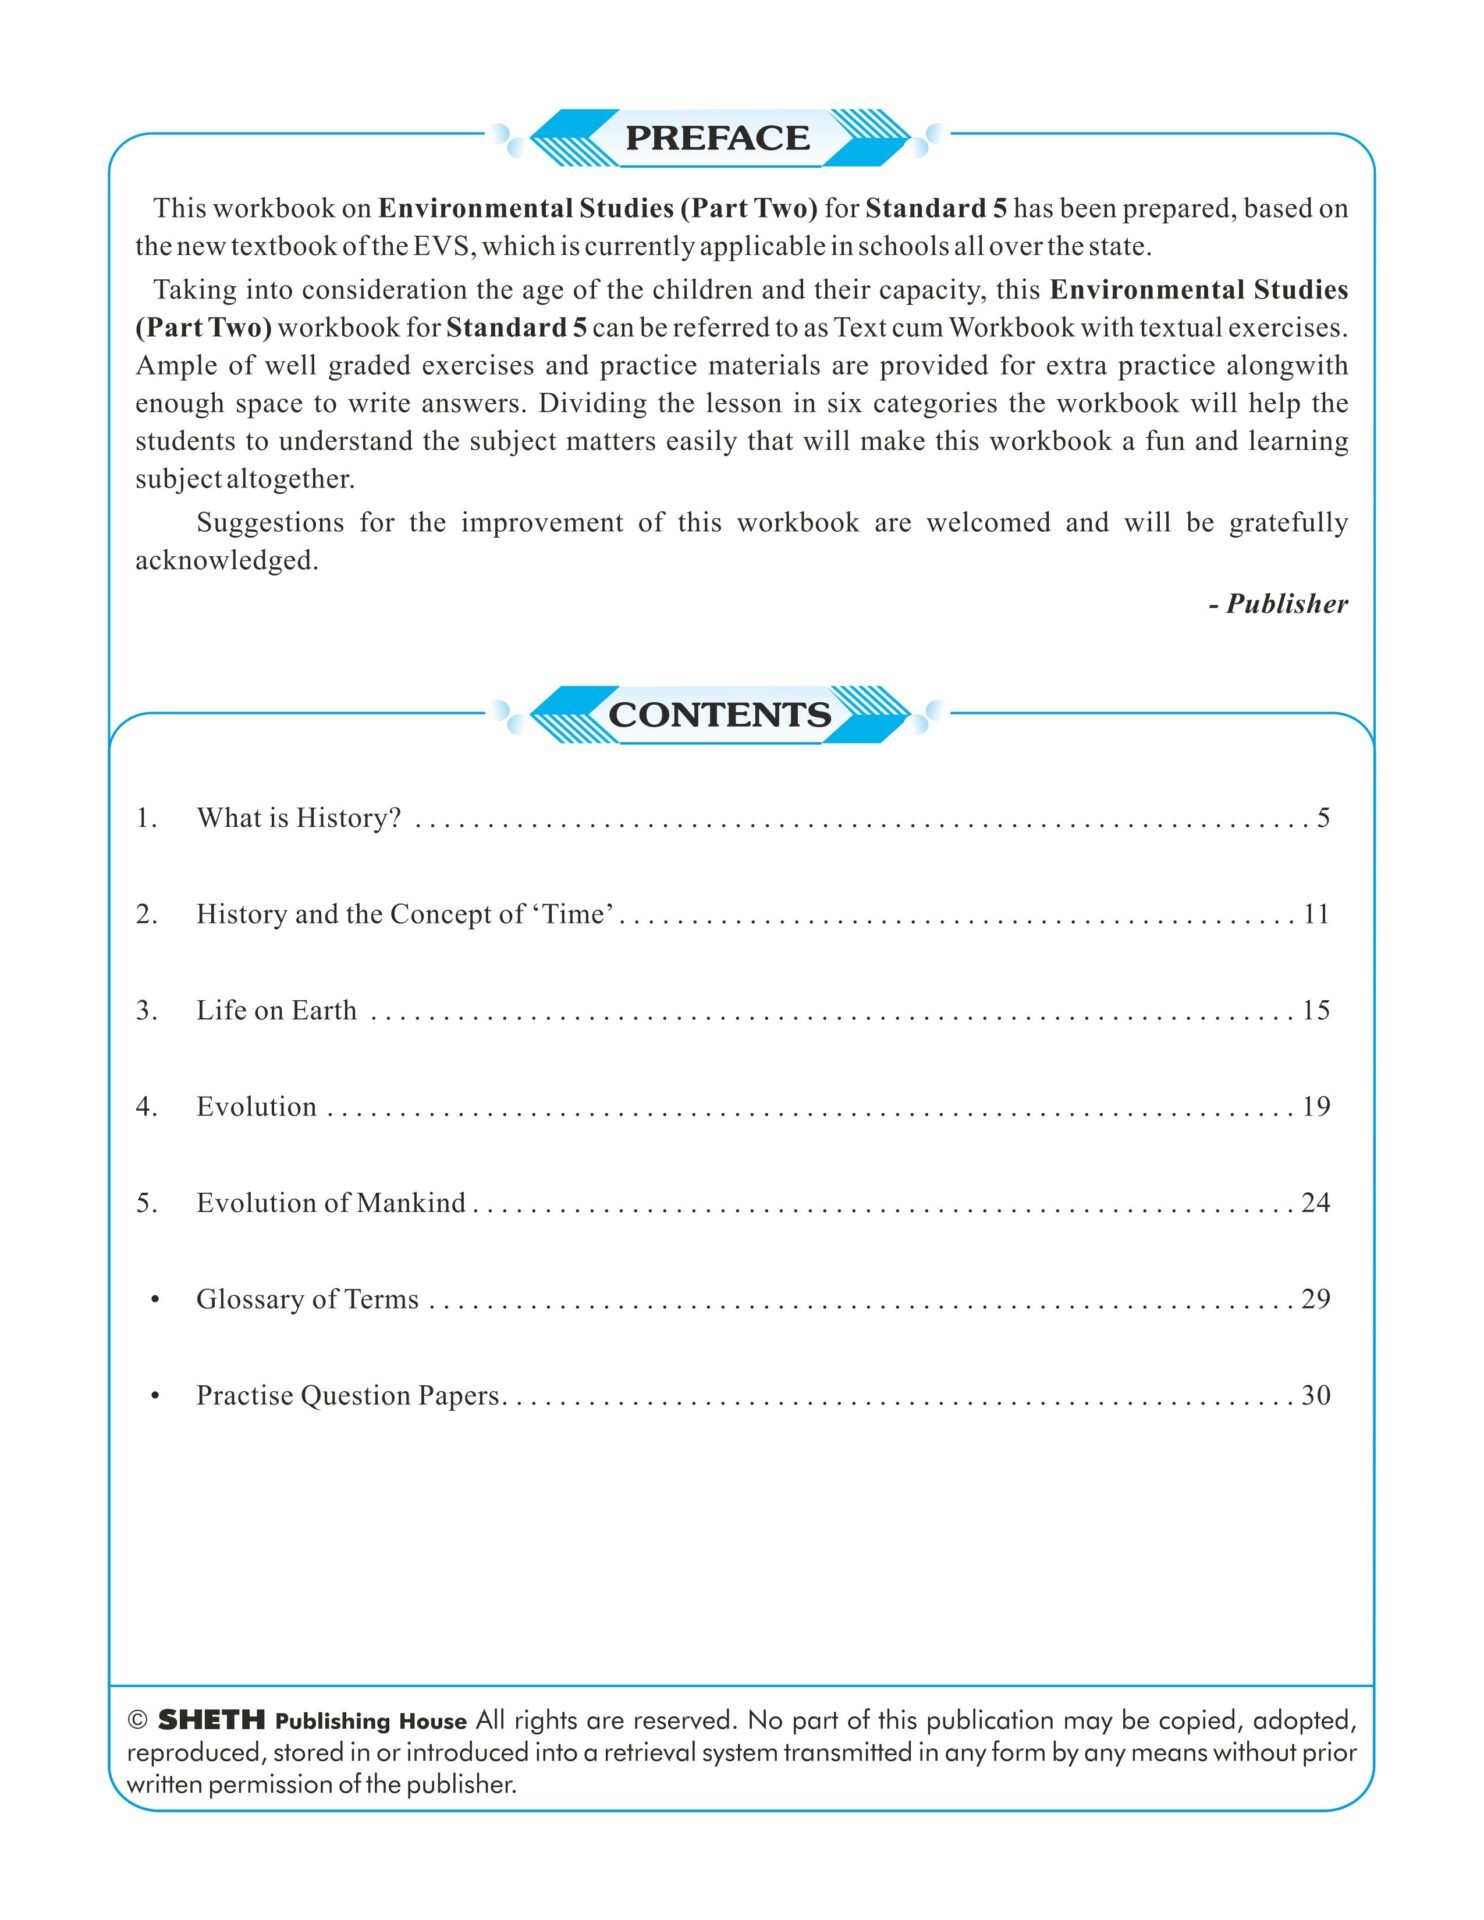 CCE Pattern Nigam Scholar Workbooks How We Came to Be Environmental Studies EVS Part Two Standard 5 Term 1 2